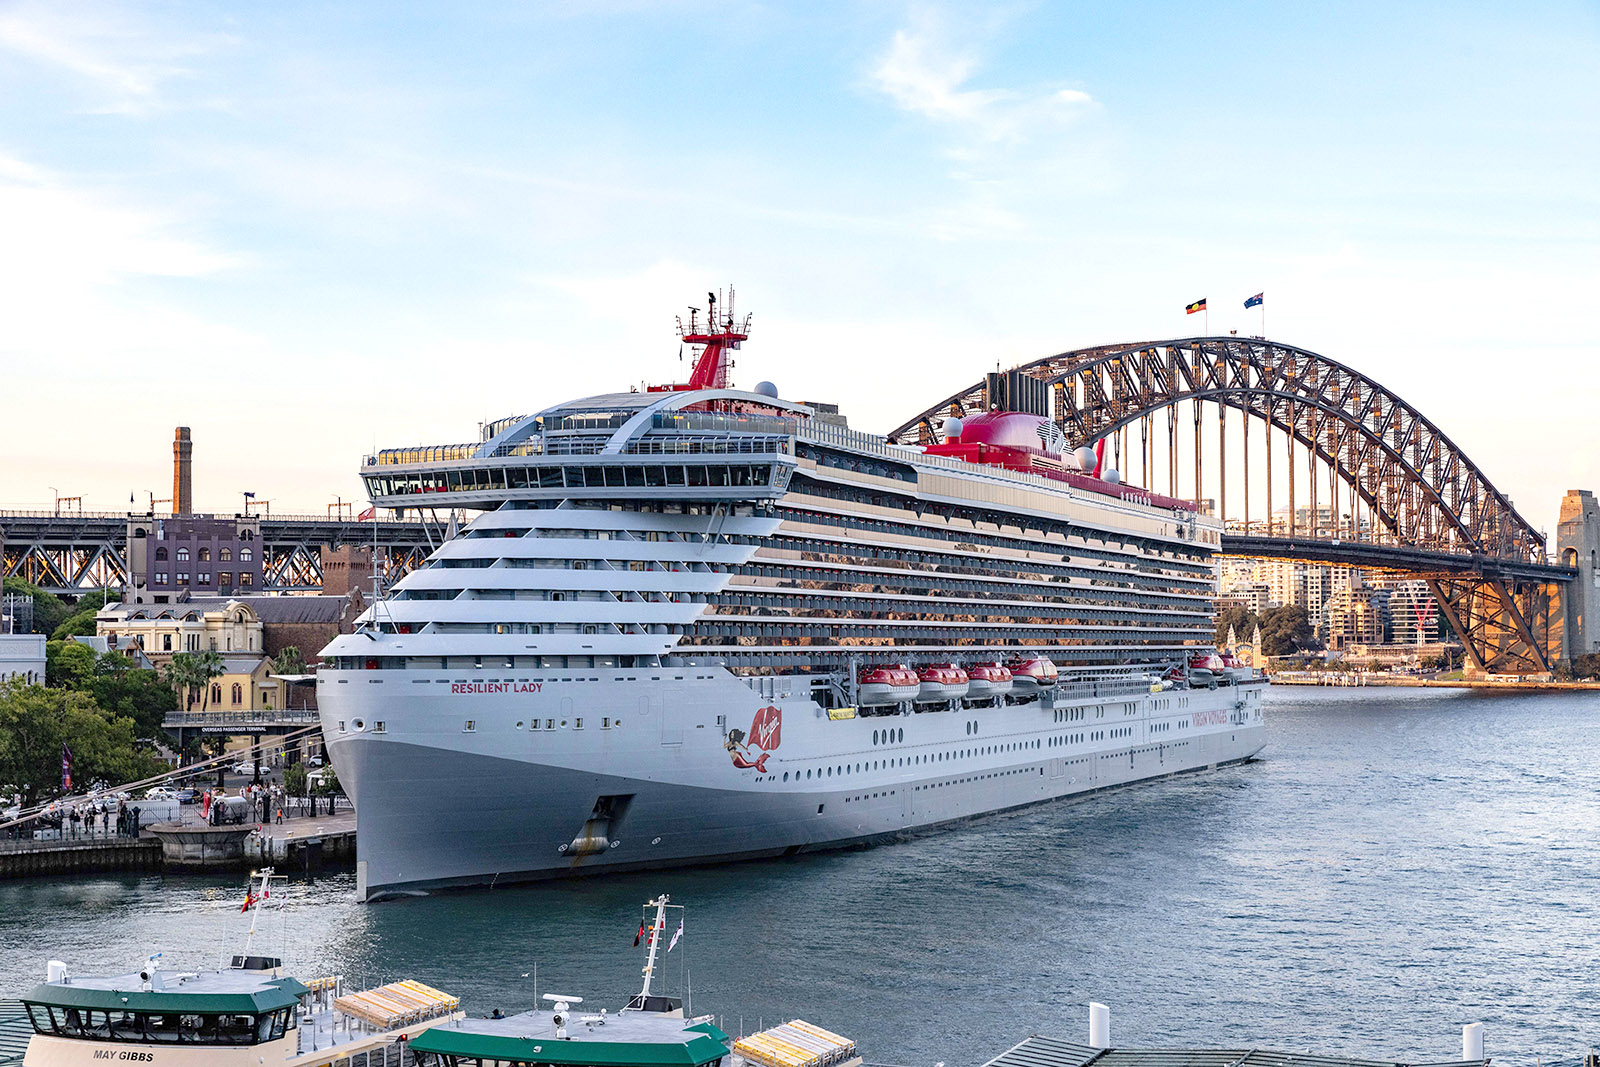 virgin voyages resilient lady in sydney